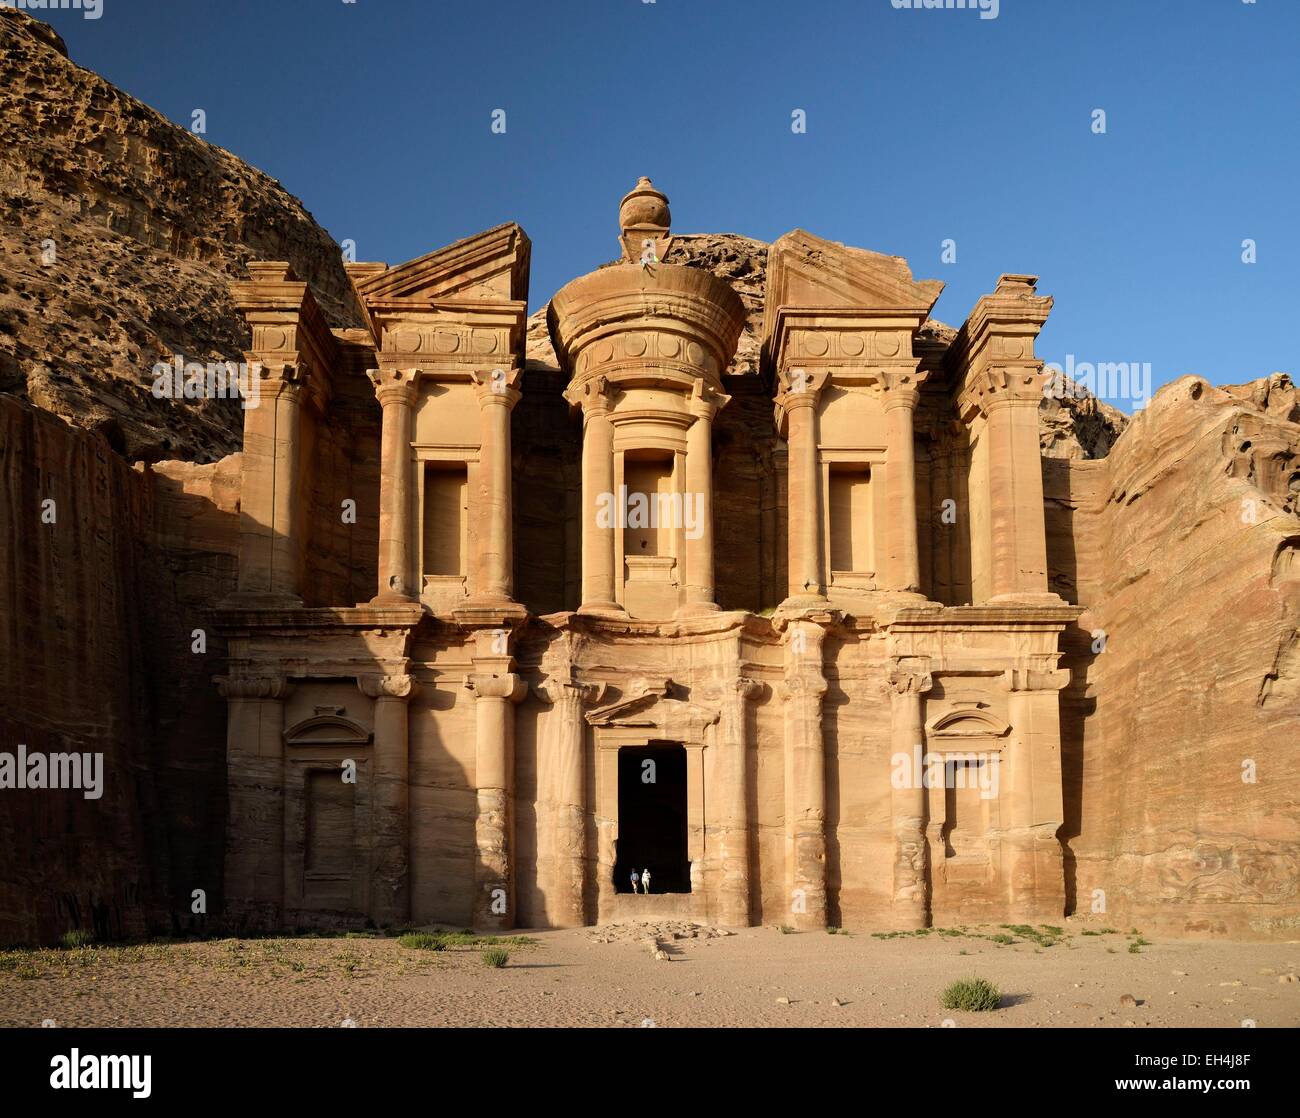 Jordan, Nabataean archeological site of Petra, listed as World Heritage by UNESCO, the famous and elaborately carved façade of Al Deir (the Monastery), carved out of a sandstone rock face Stock Photo